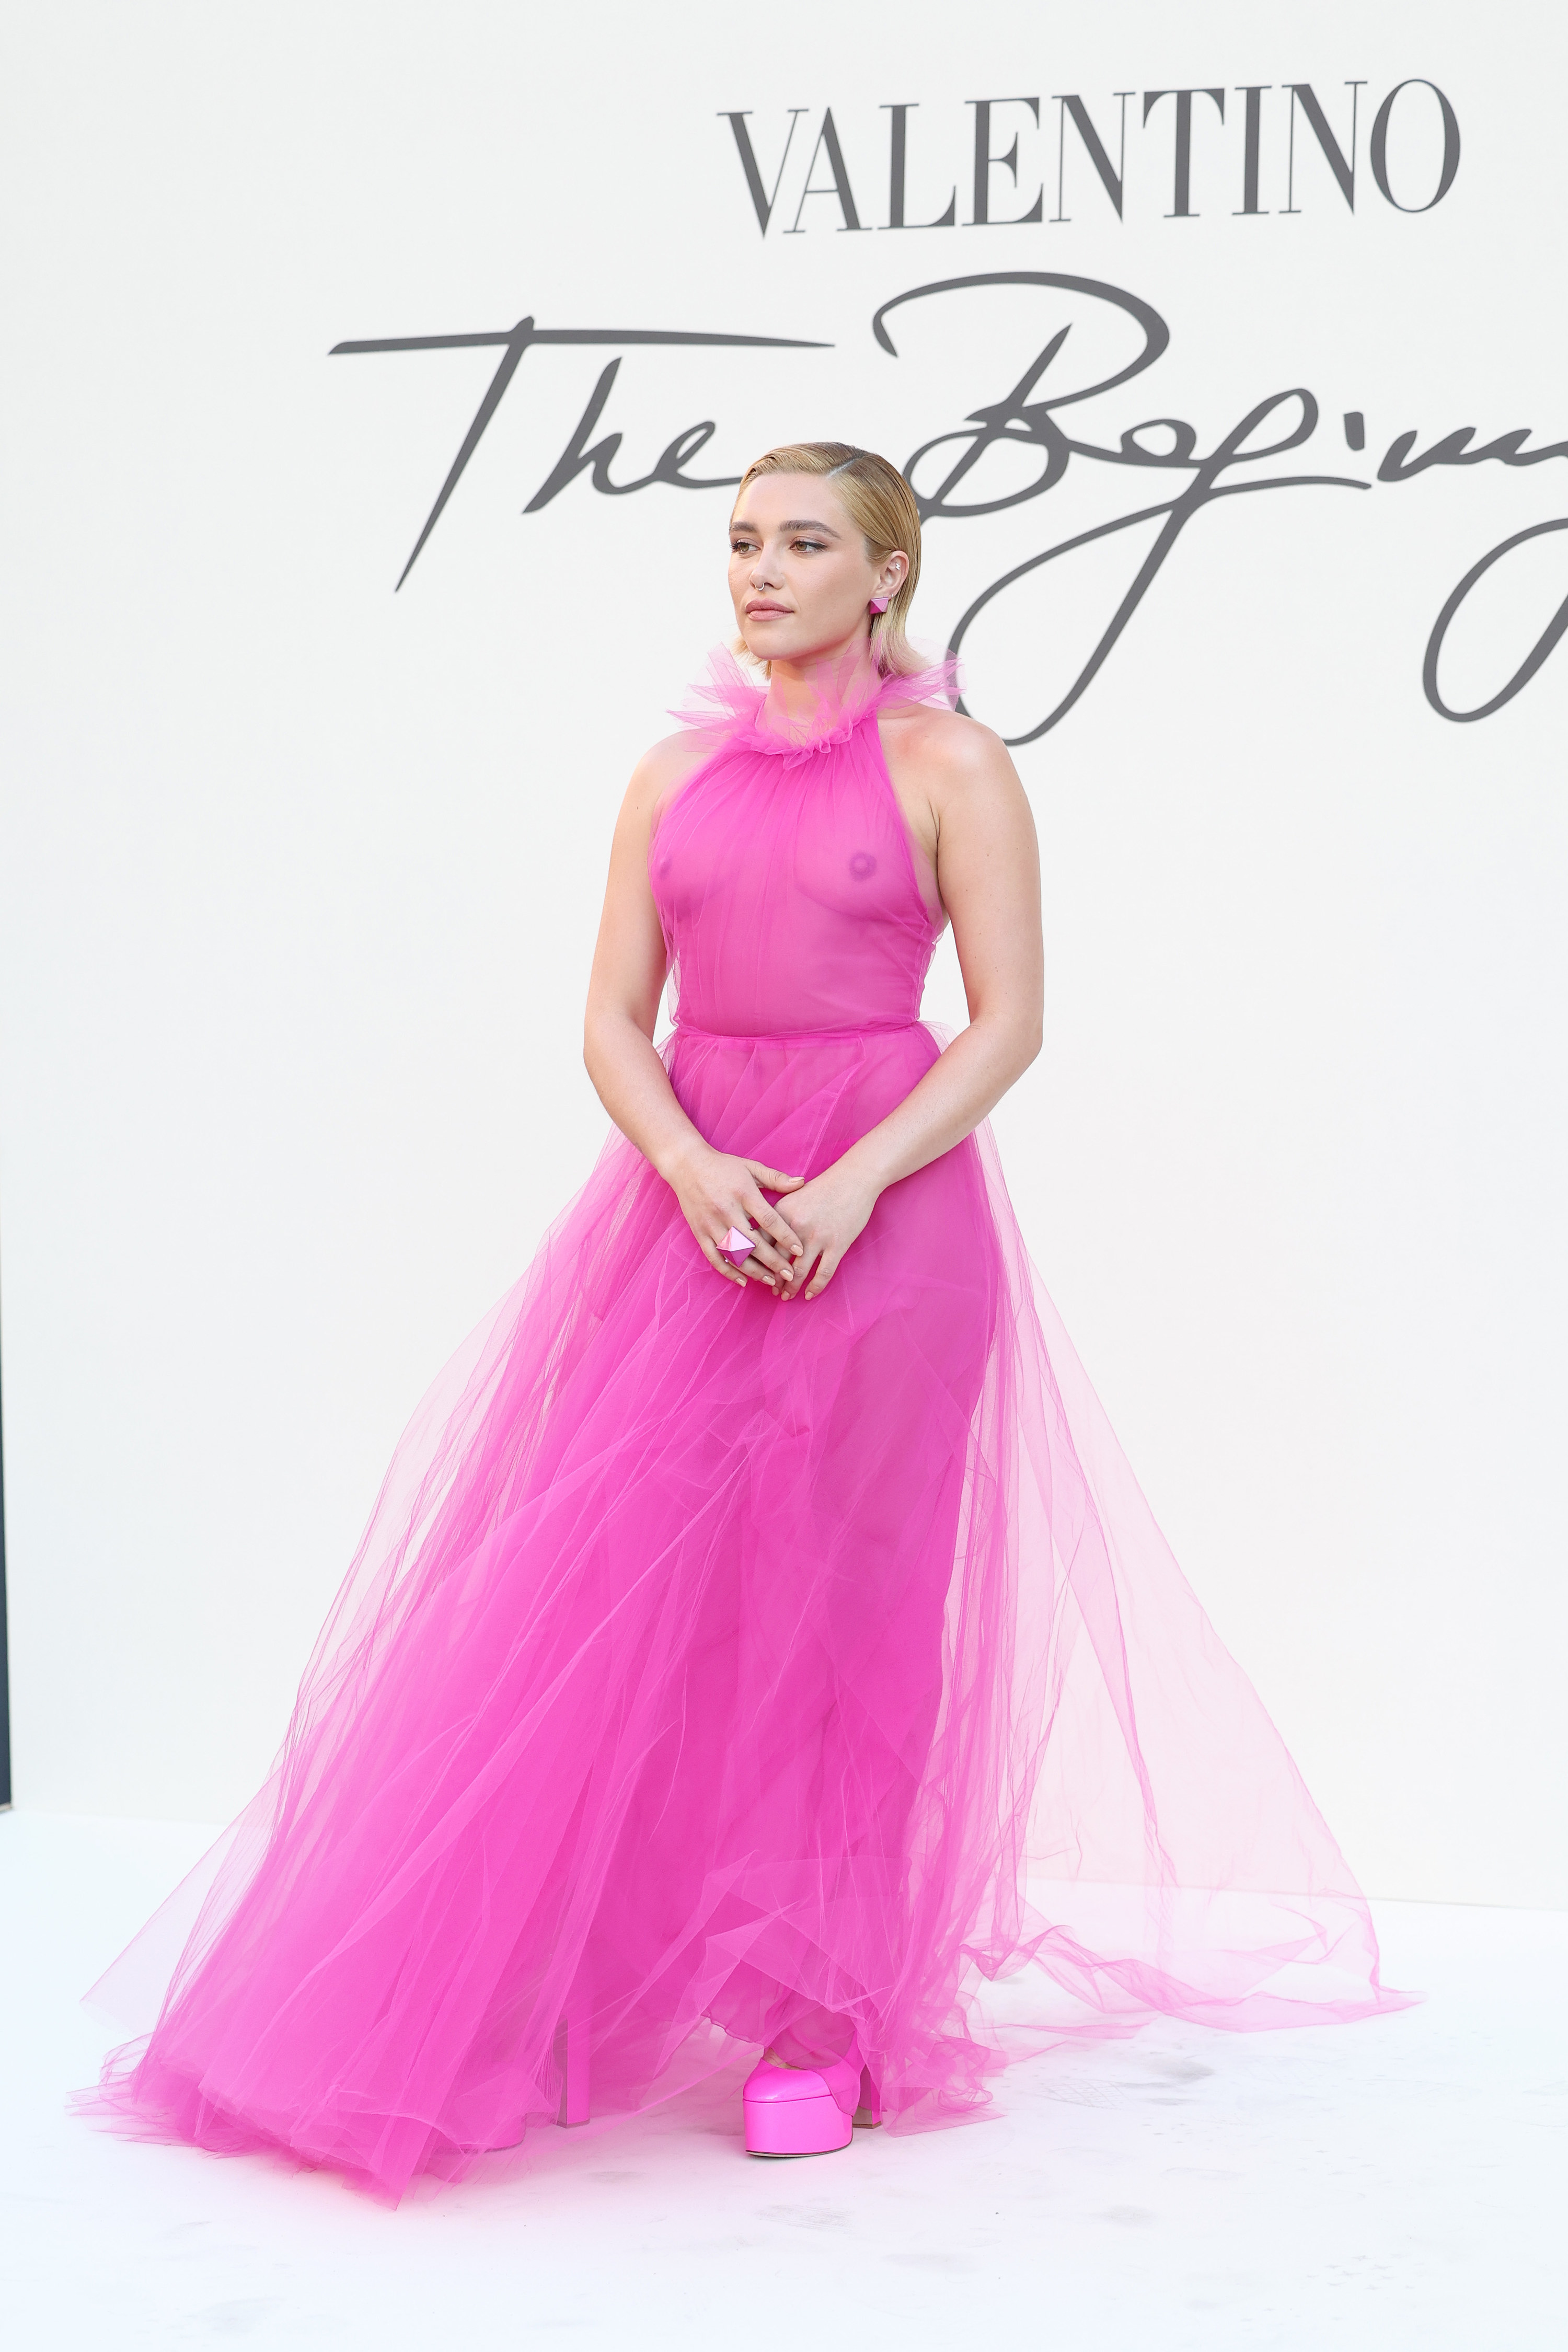 Florence Pugh wearing a sheer Valentino gown